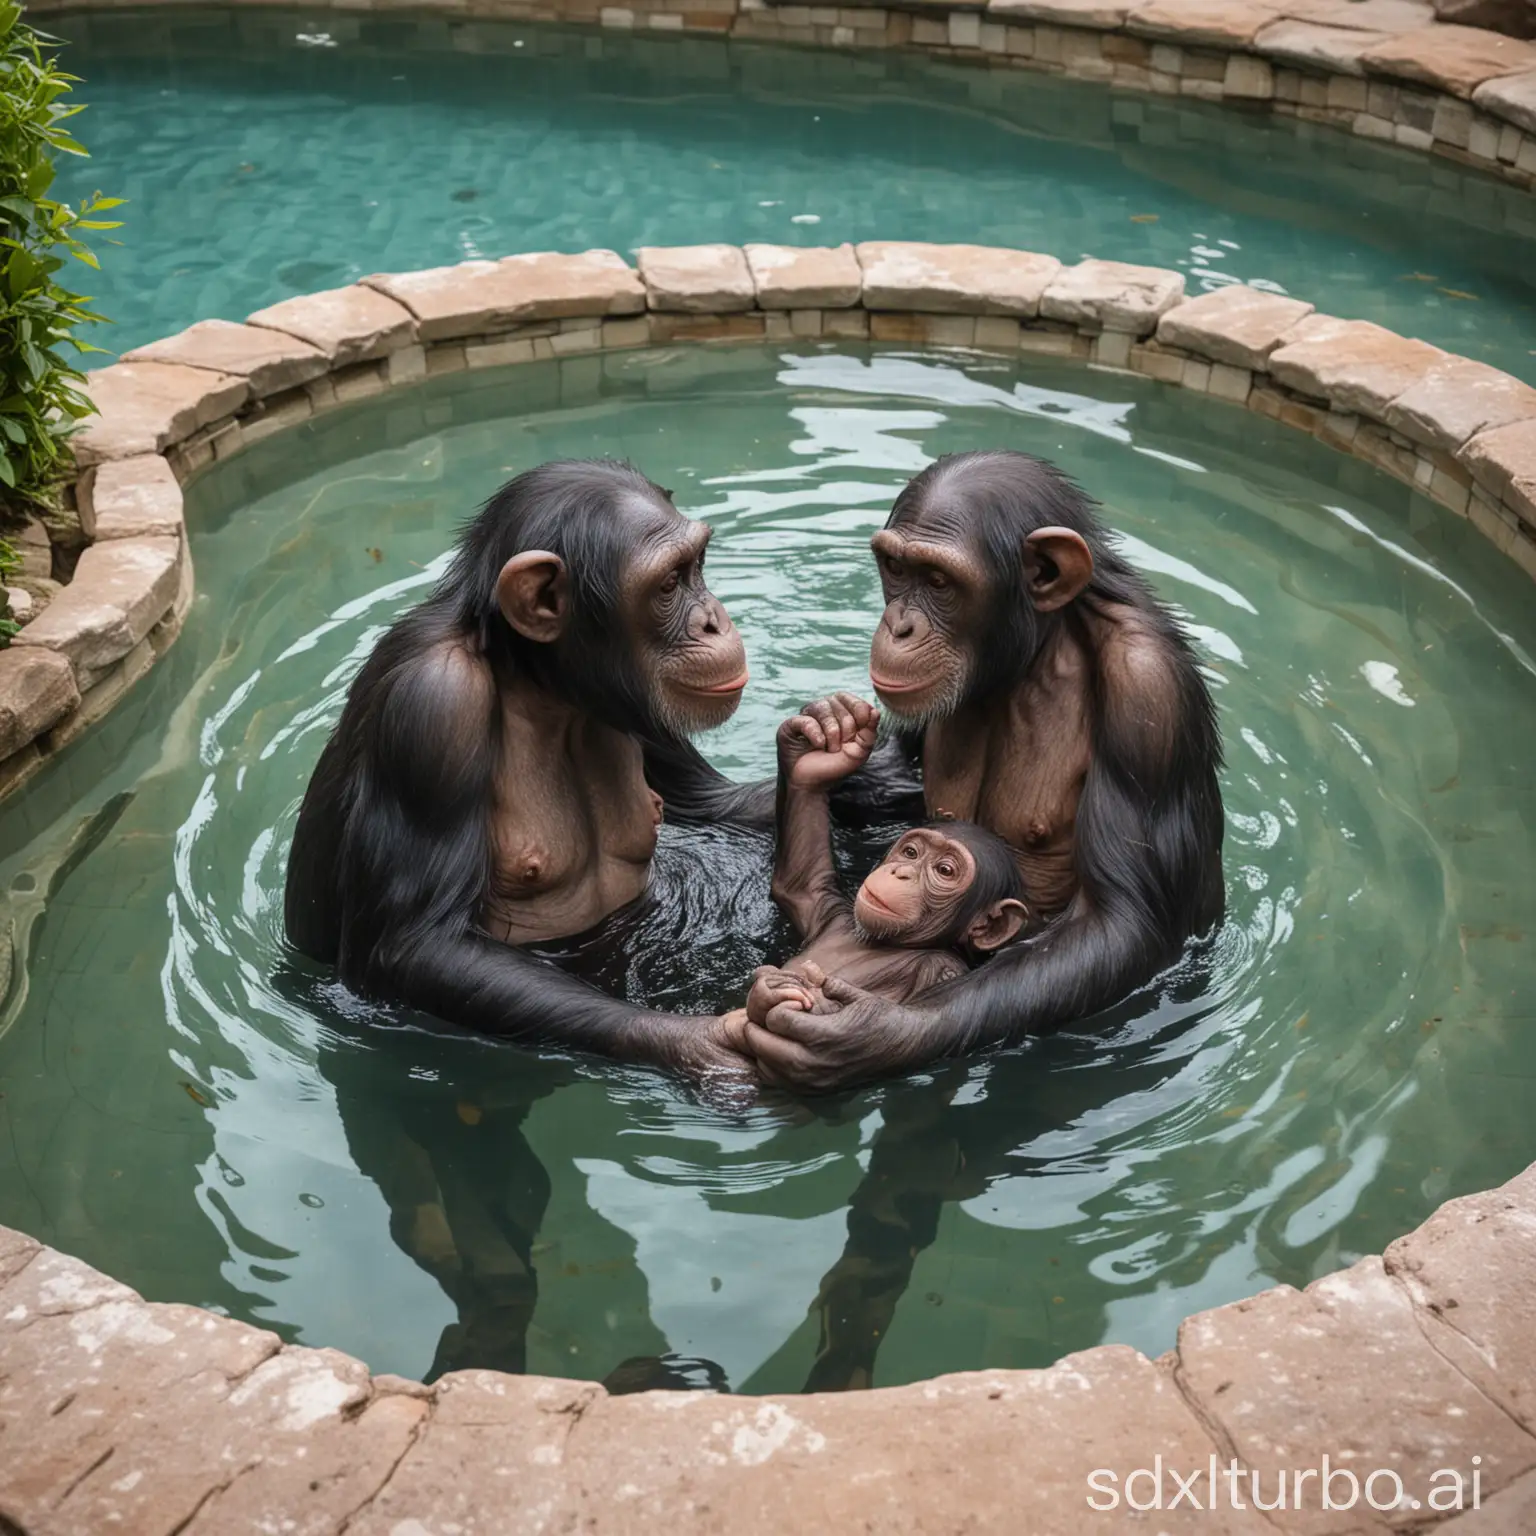 Two chimpanzees playing with their cub in the pool of a beautiful spa